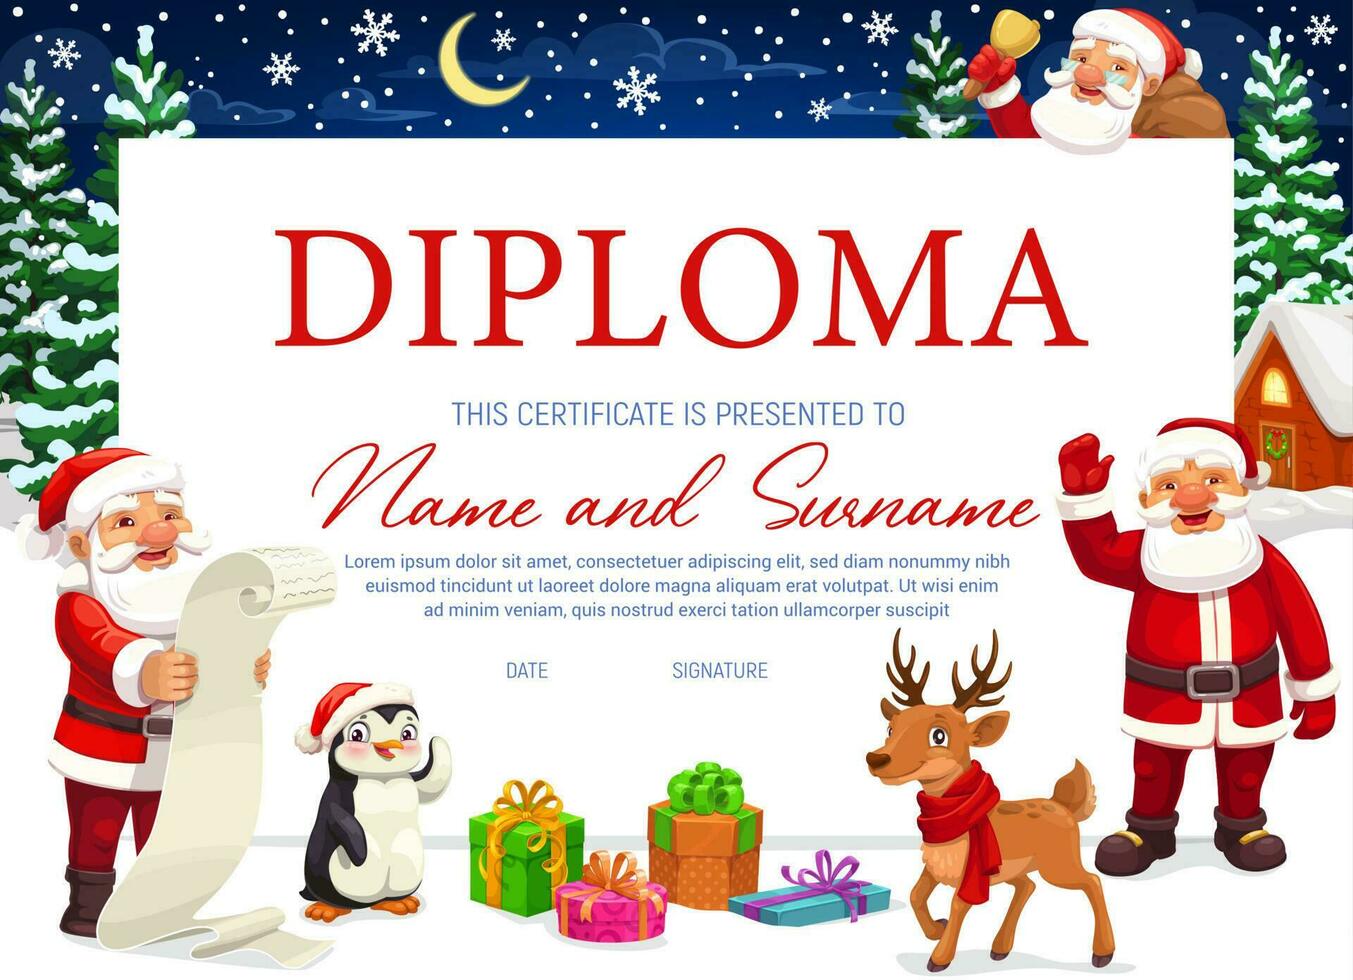 Diploma certificate with Christmas background vector